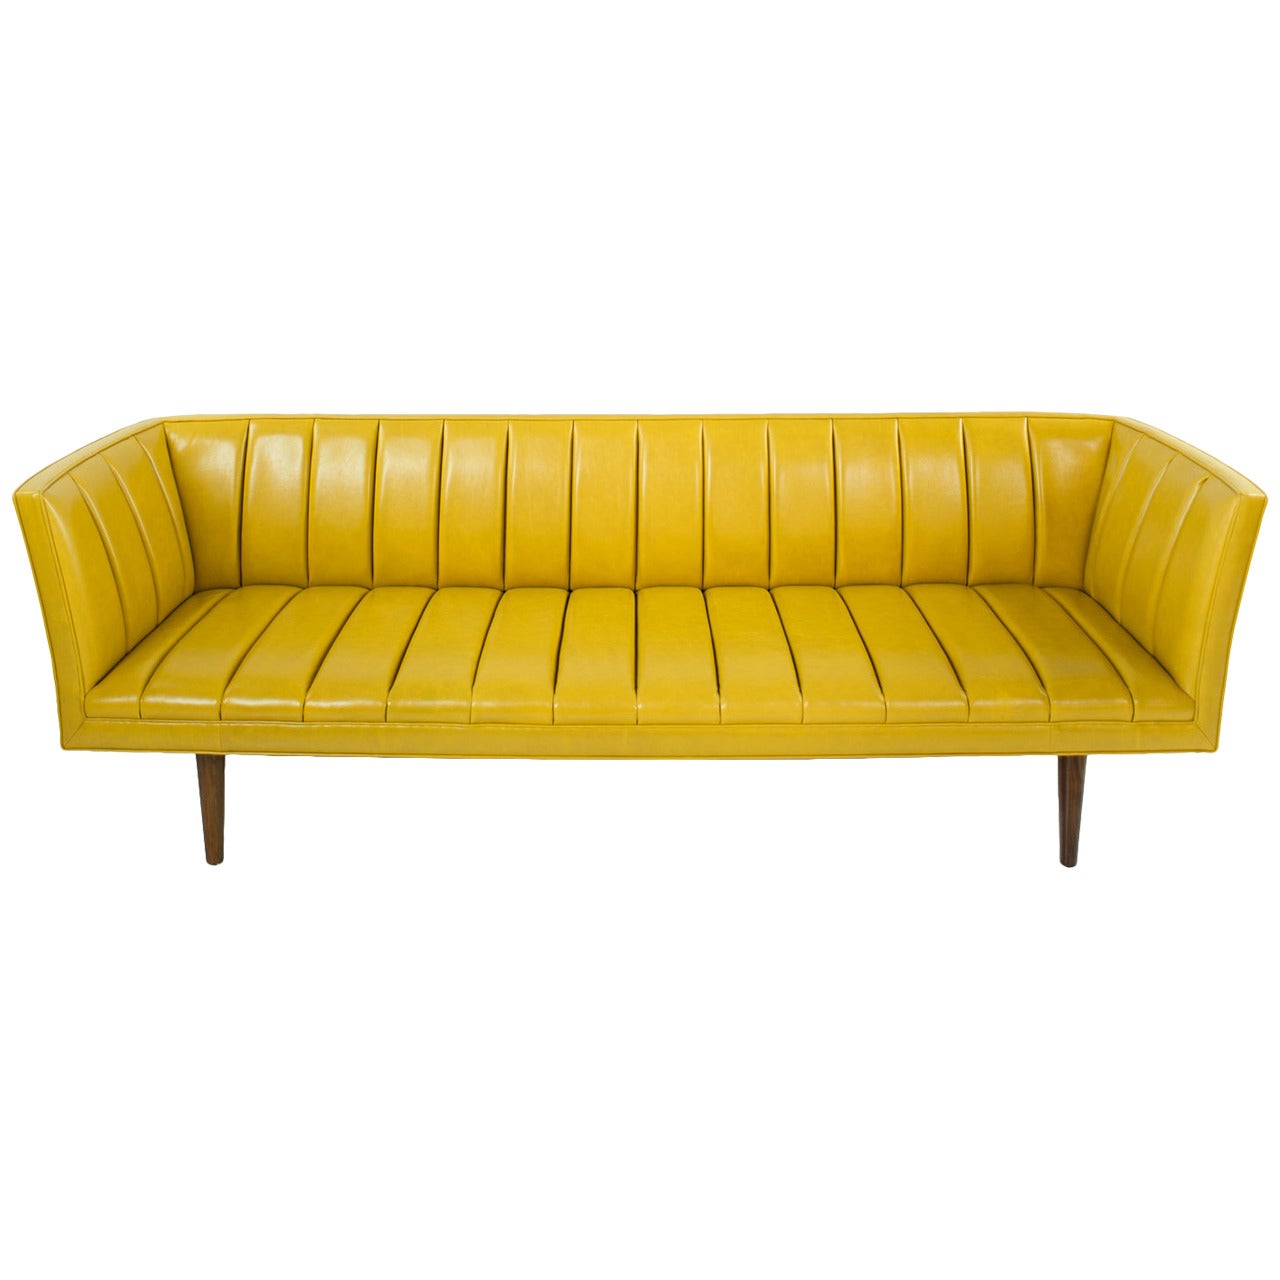 Famechon Sofa with Channeled Back and Seat, Walnut Legs, Yellow Leather COM/COL